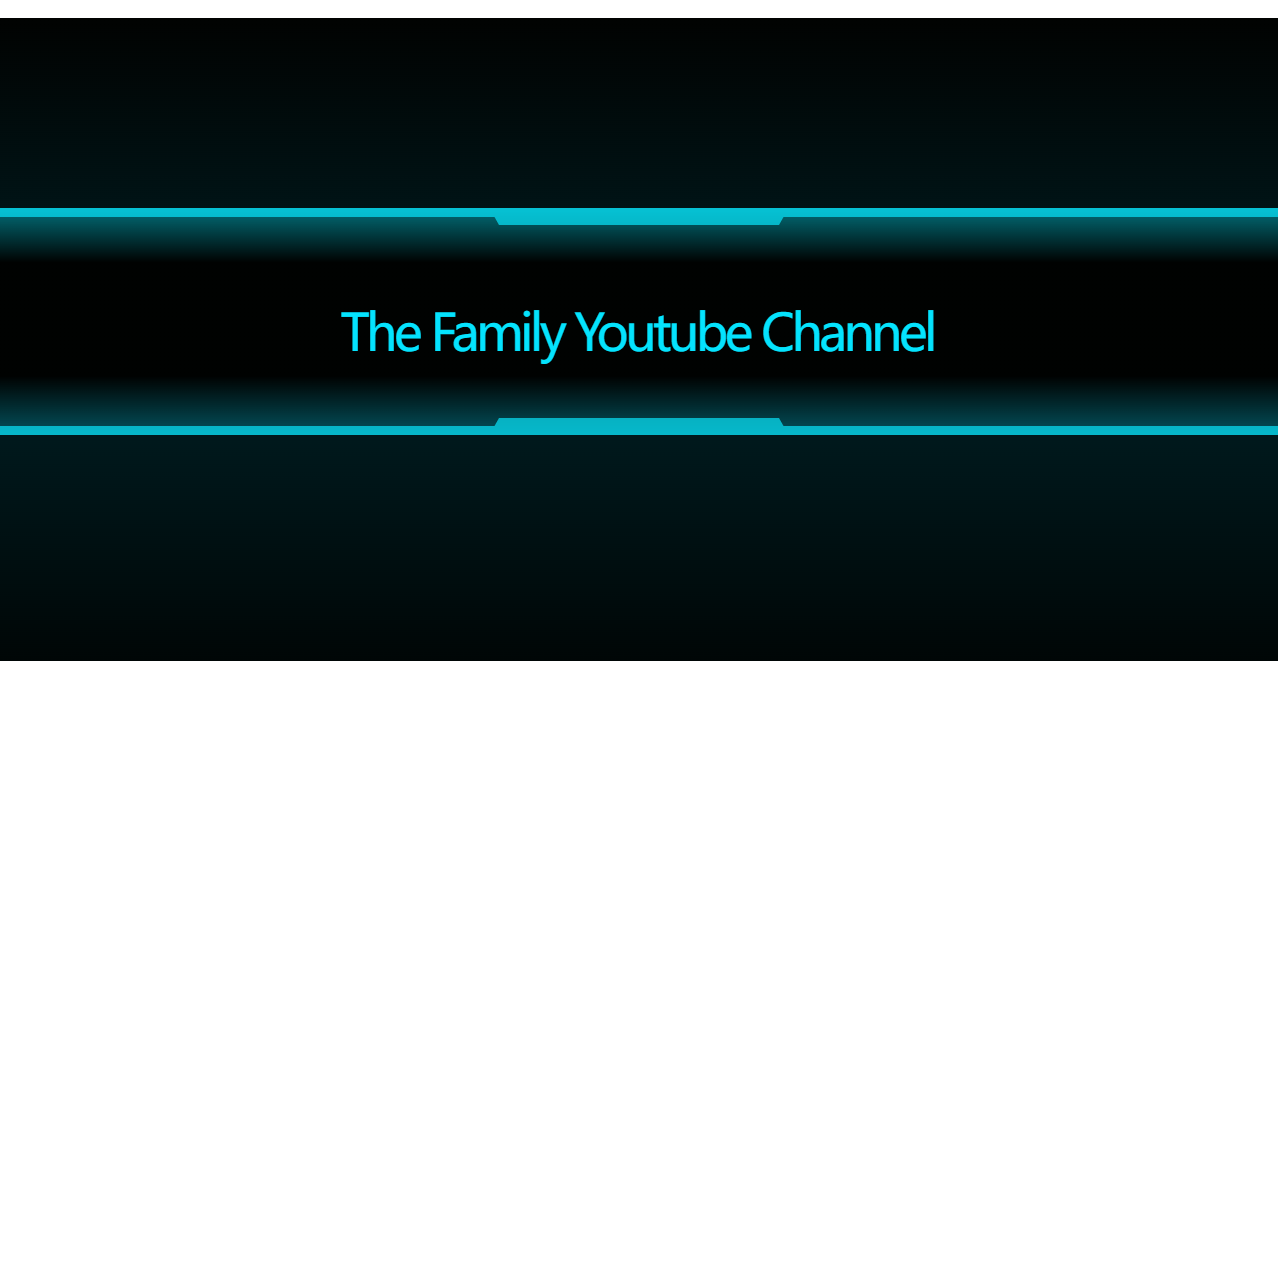 The Family Youtube Channel Banner